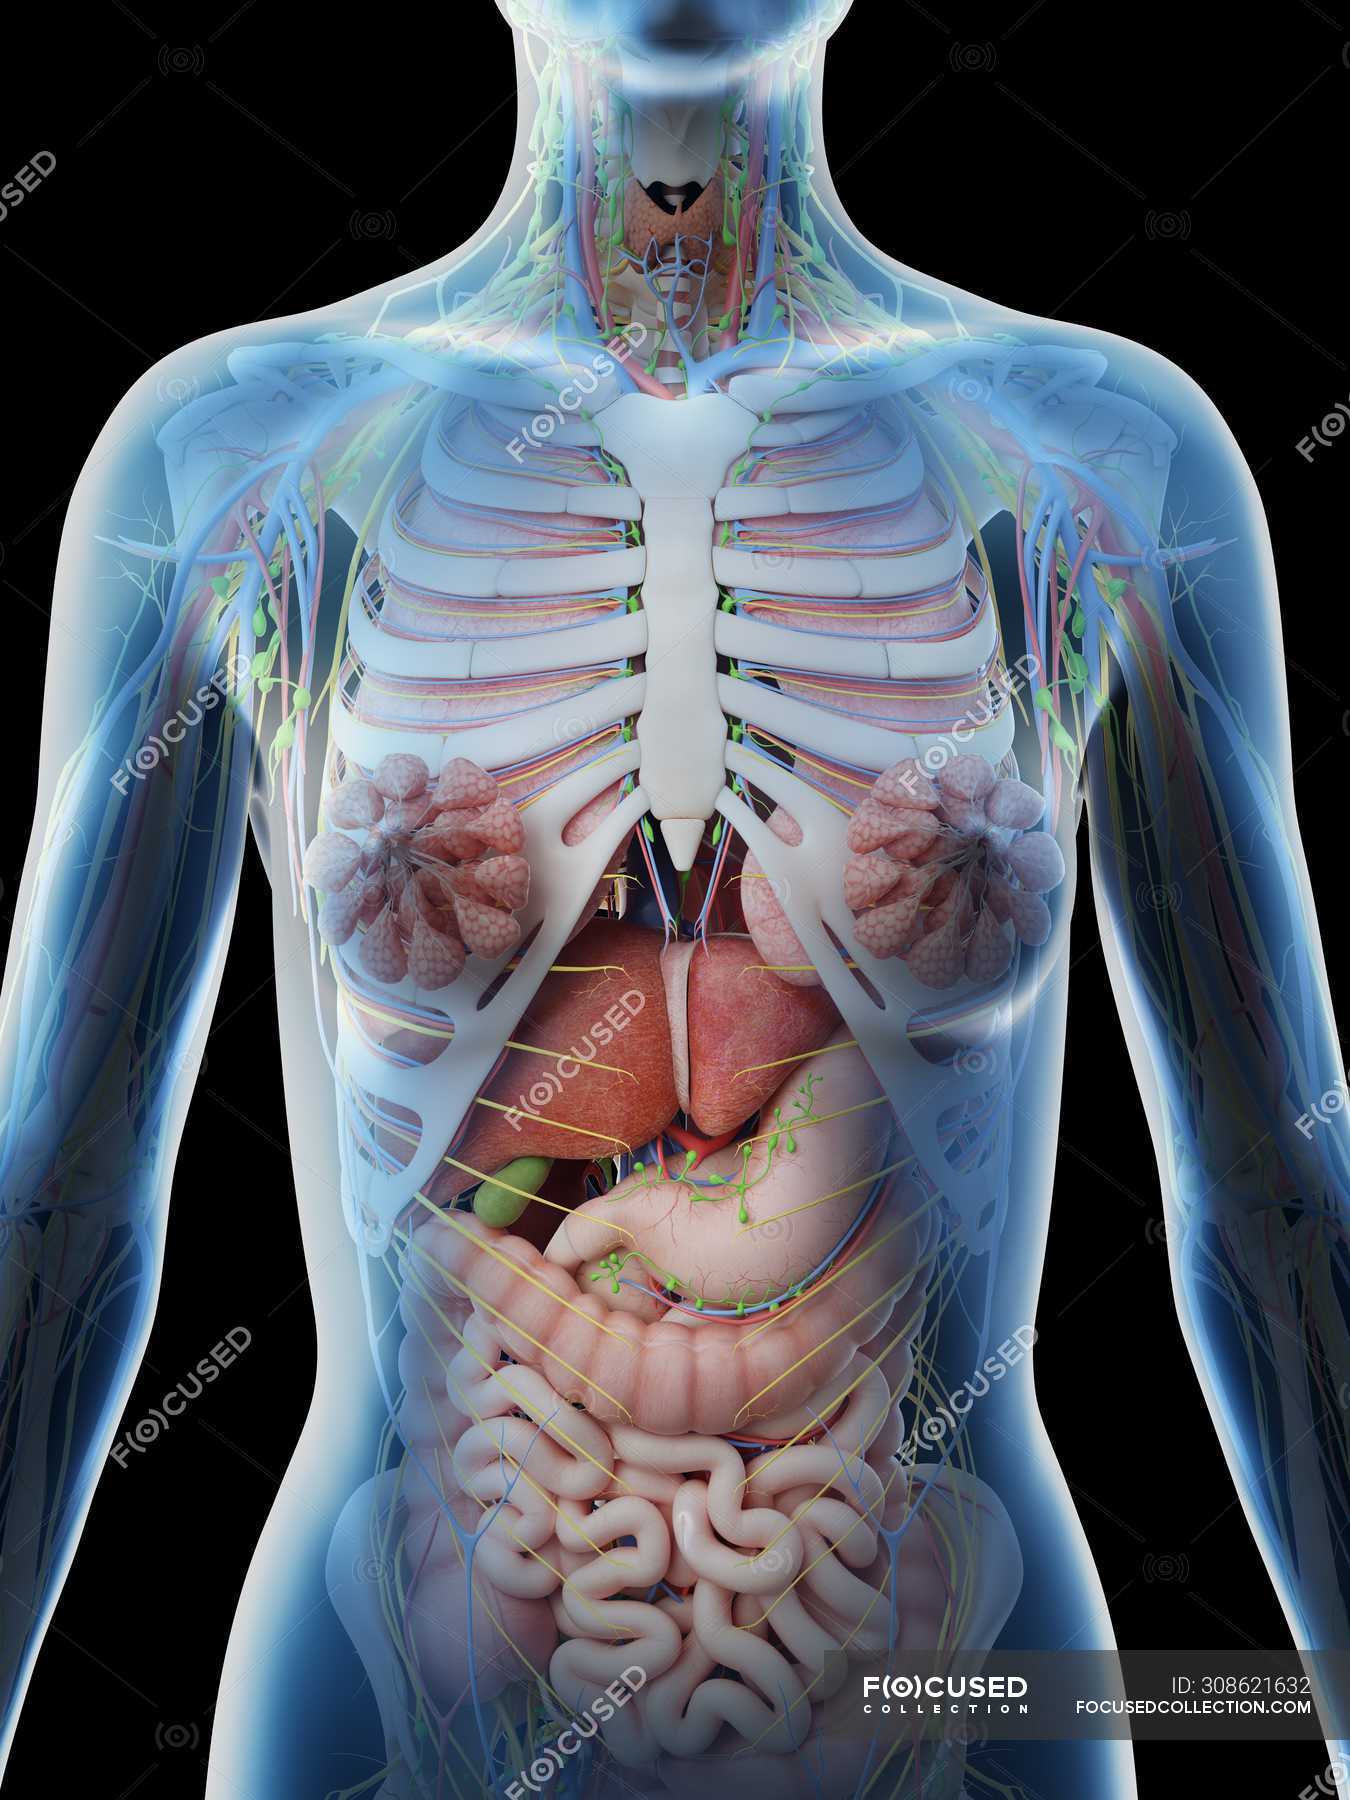 Female Upper Body Anatomy And Internal Organs Computer Illustration Mammary Glands Healthy Stock Photo